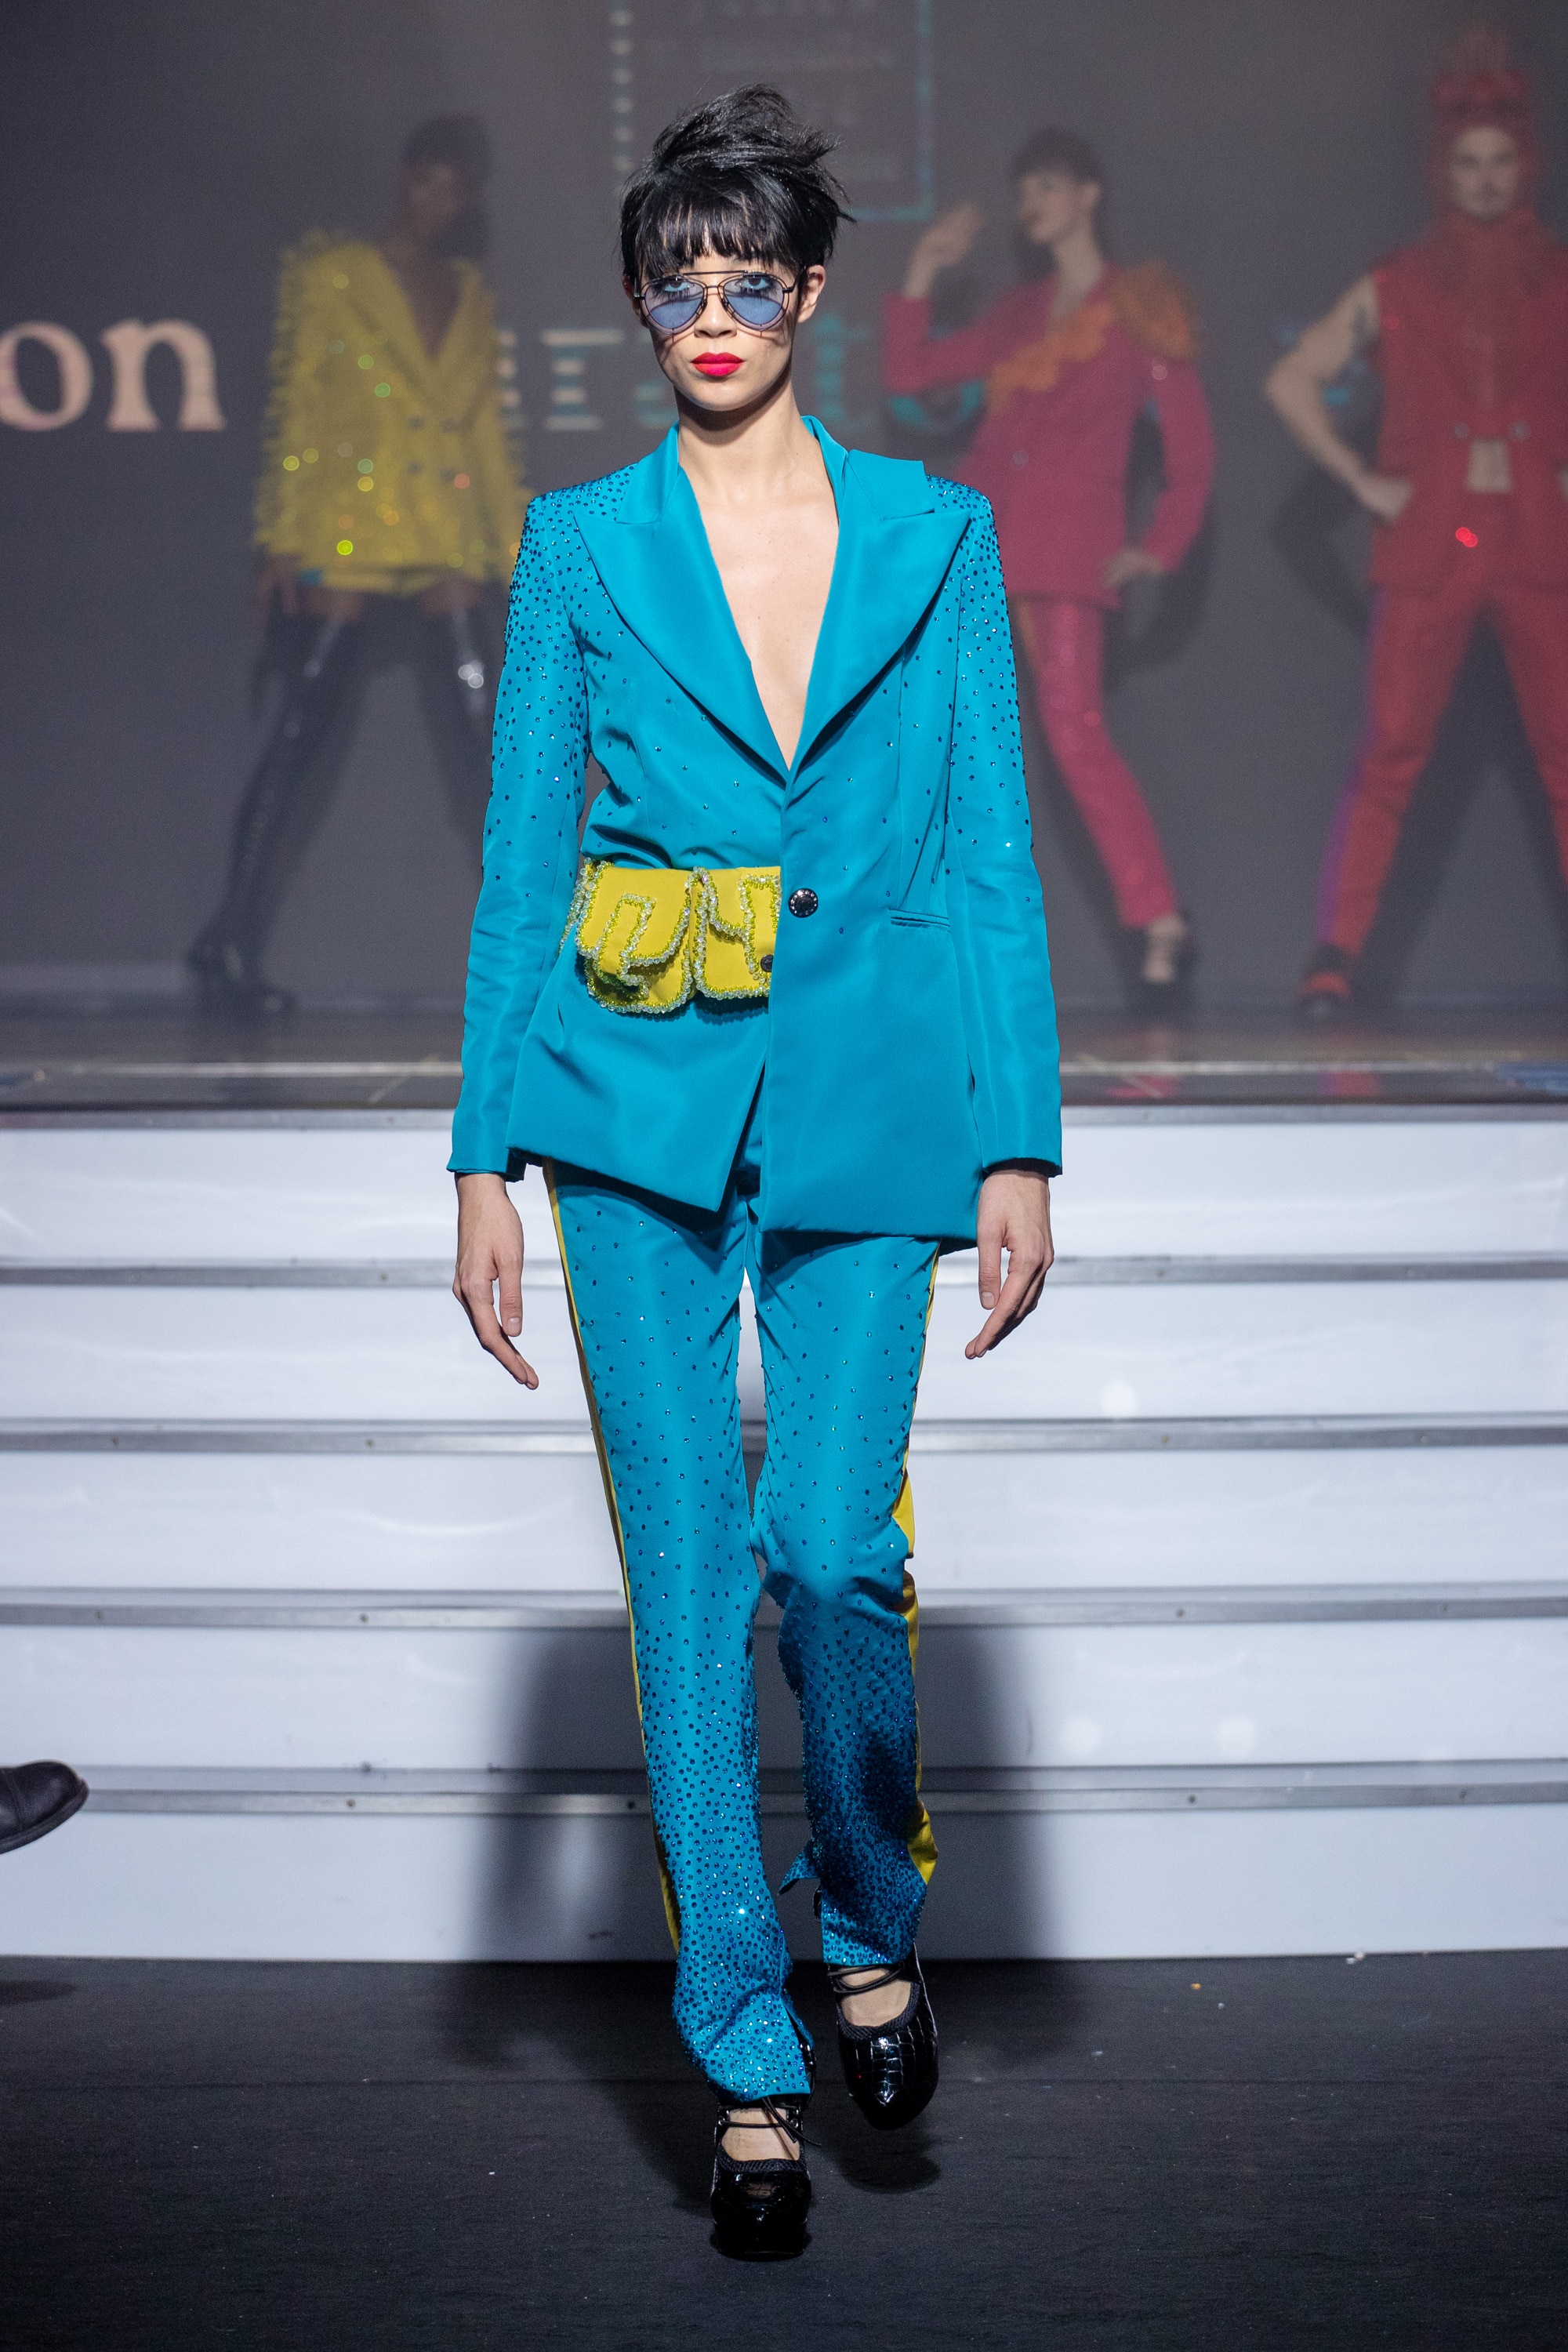 a model wearing  bleu and green  silk  outfit  crystal  and belt  by on aura tout vu haute couture spring summer 2020